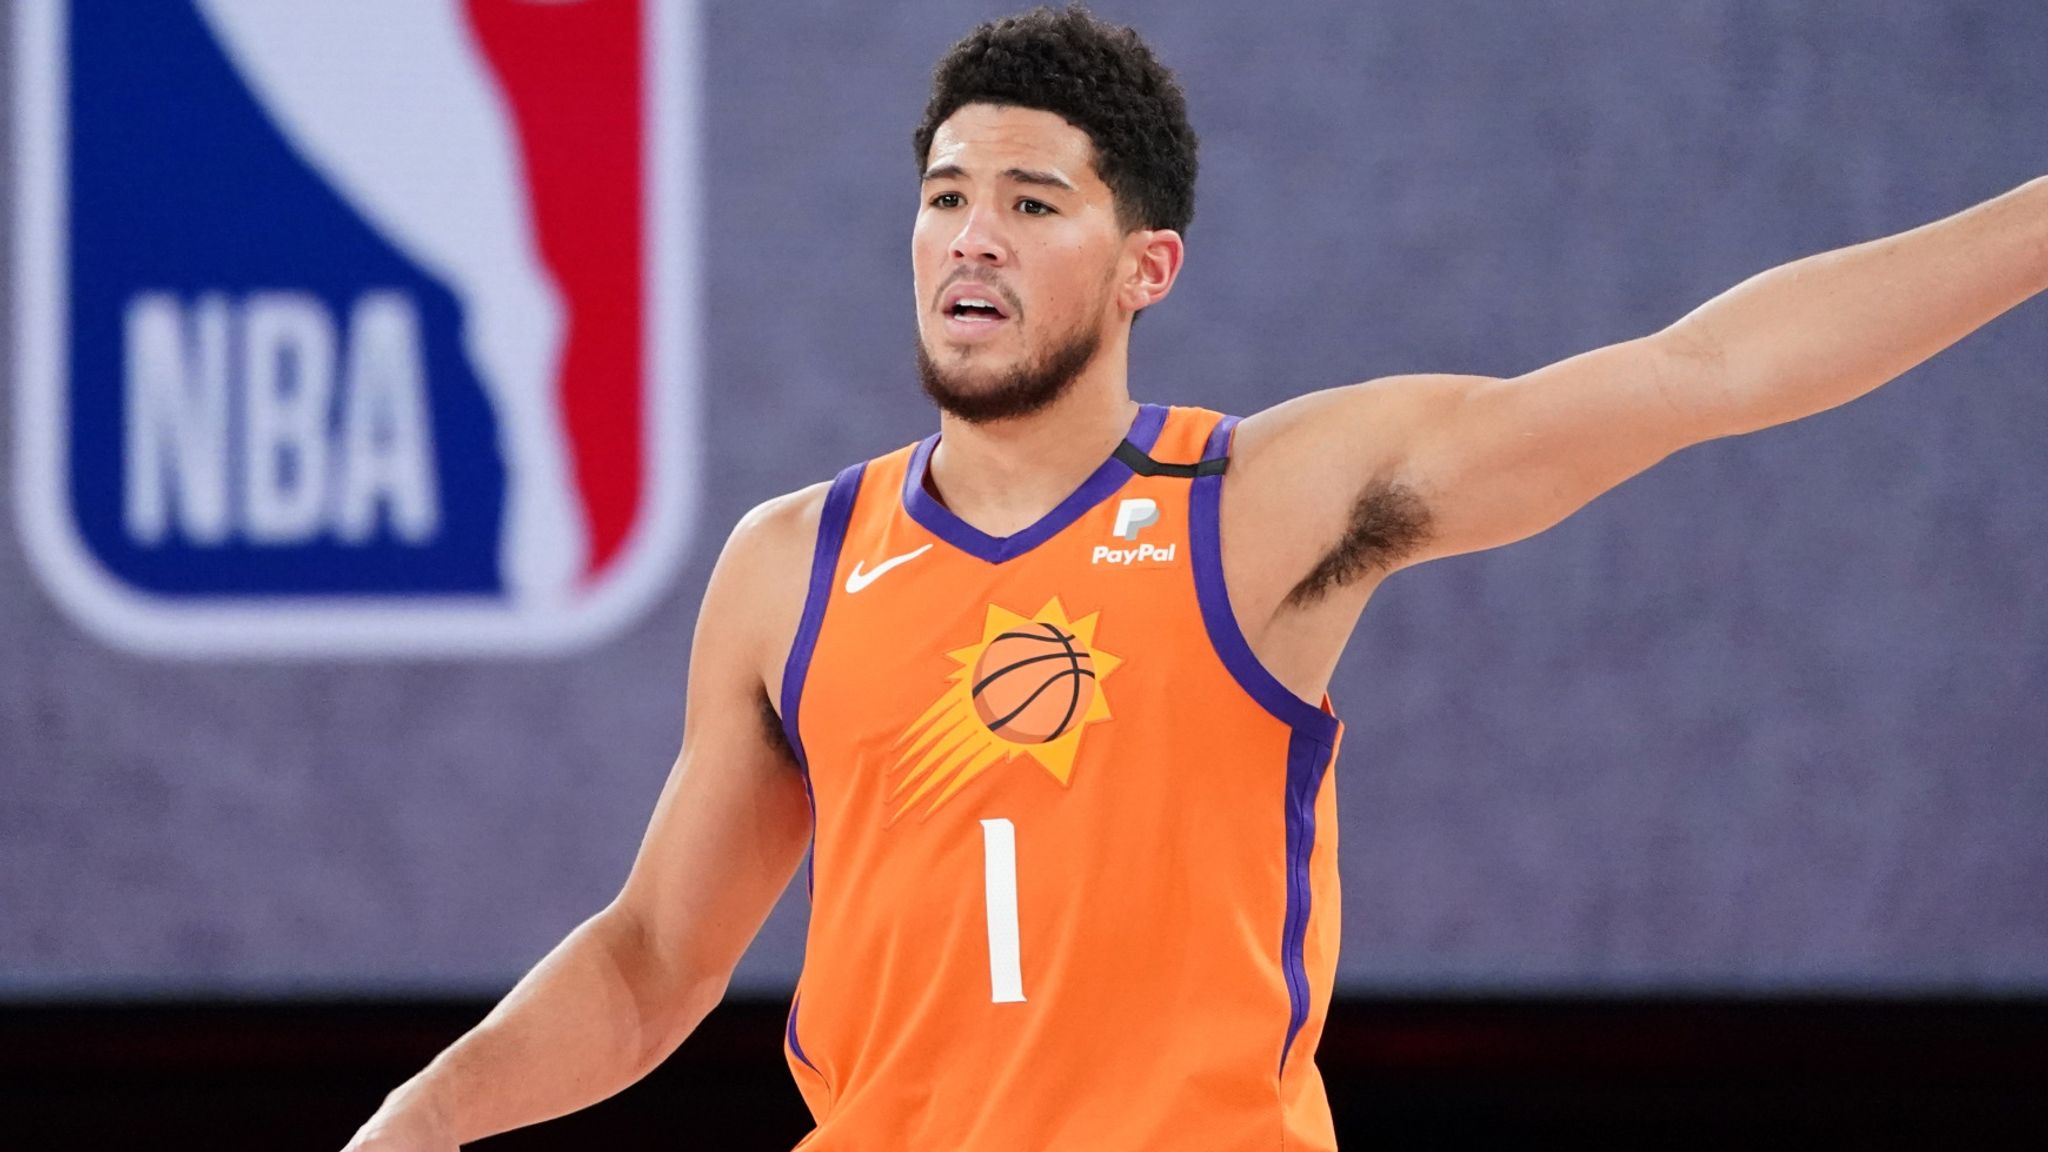 devin booker equality jersey